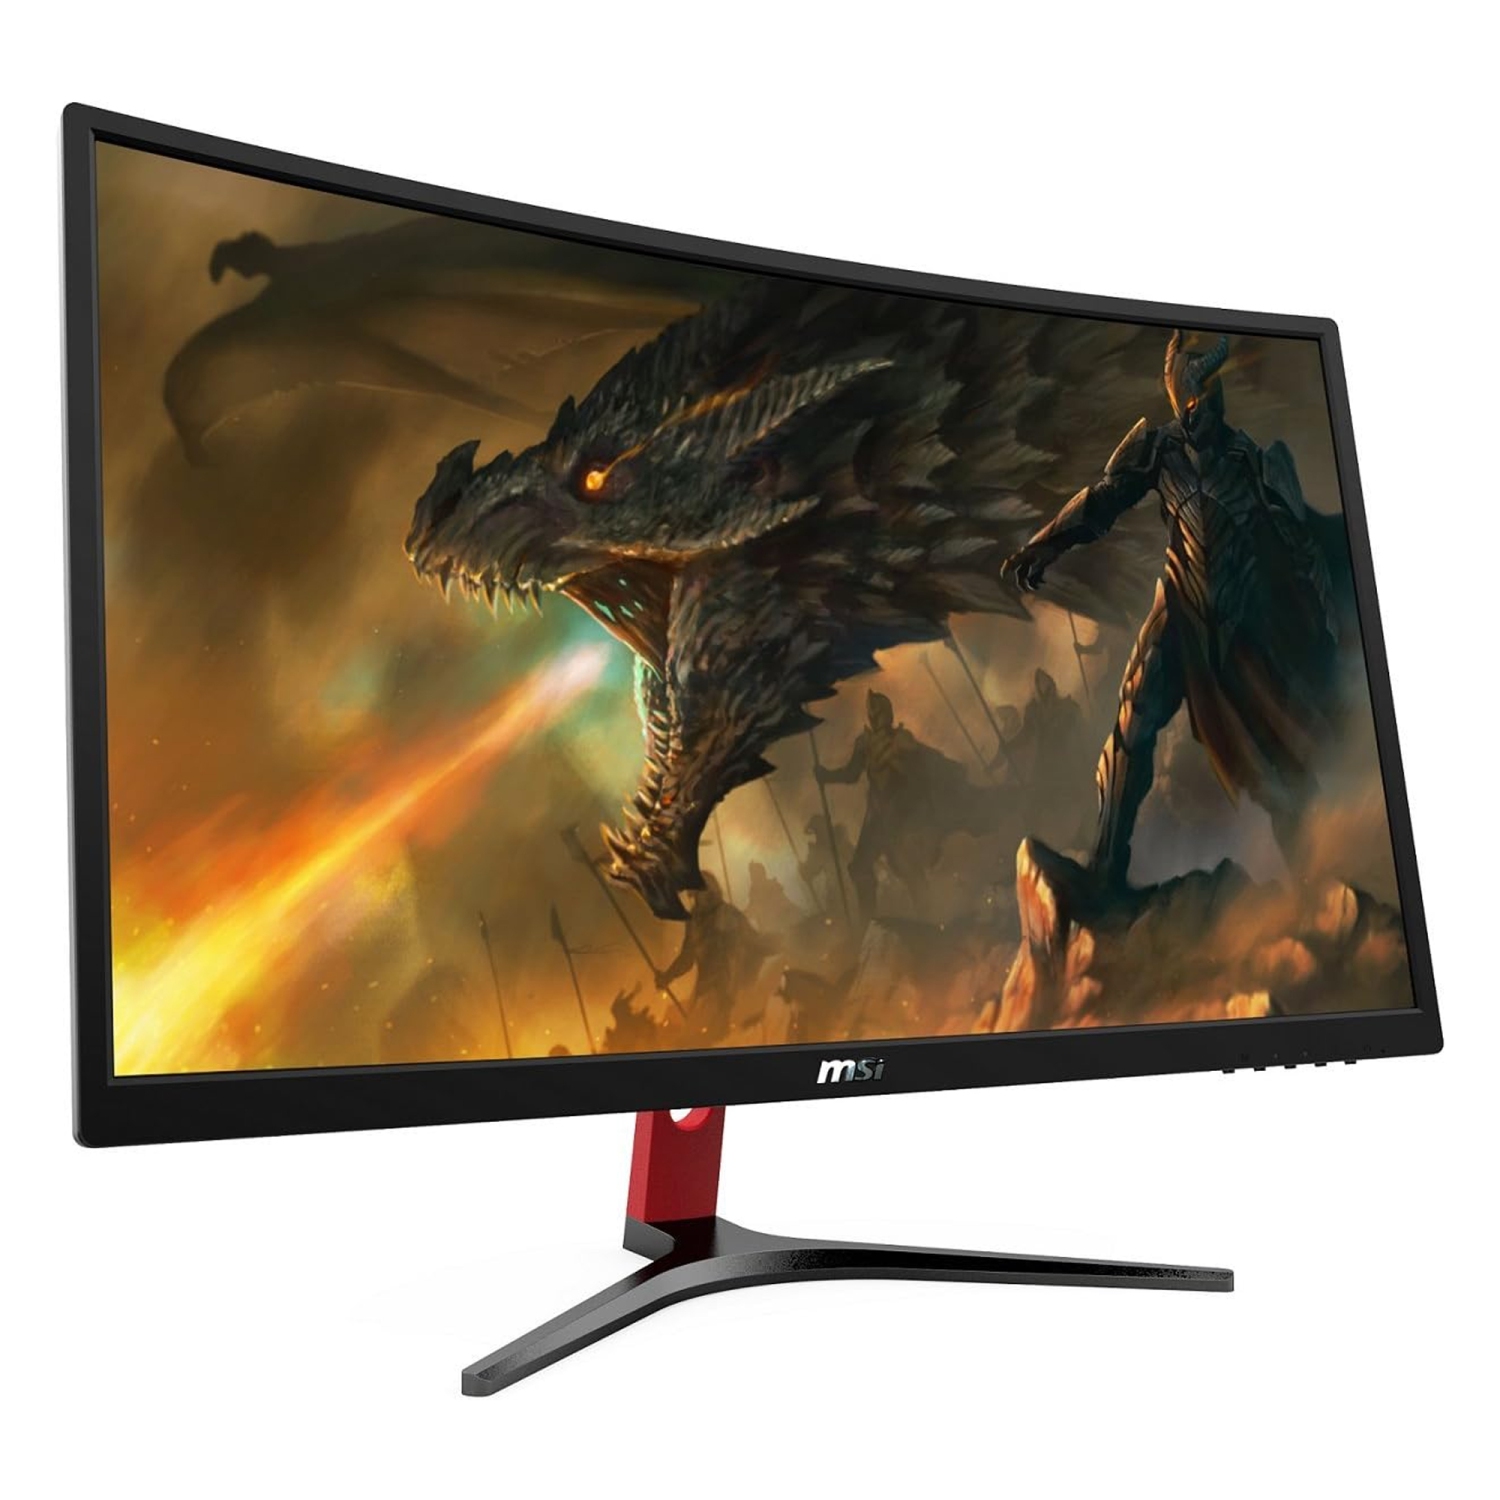 MSI Full HD FreeSync Gaming Monitor 24" Curved Non-Glare 1ms Led Wide Screen 1920 X 1080 144Hz Refresh Rate (Optix G24C),Black/Red